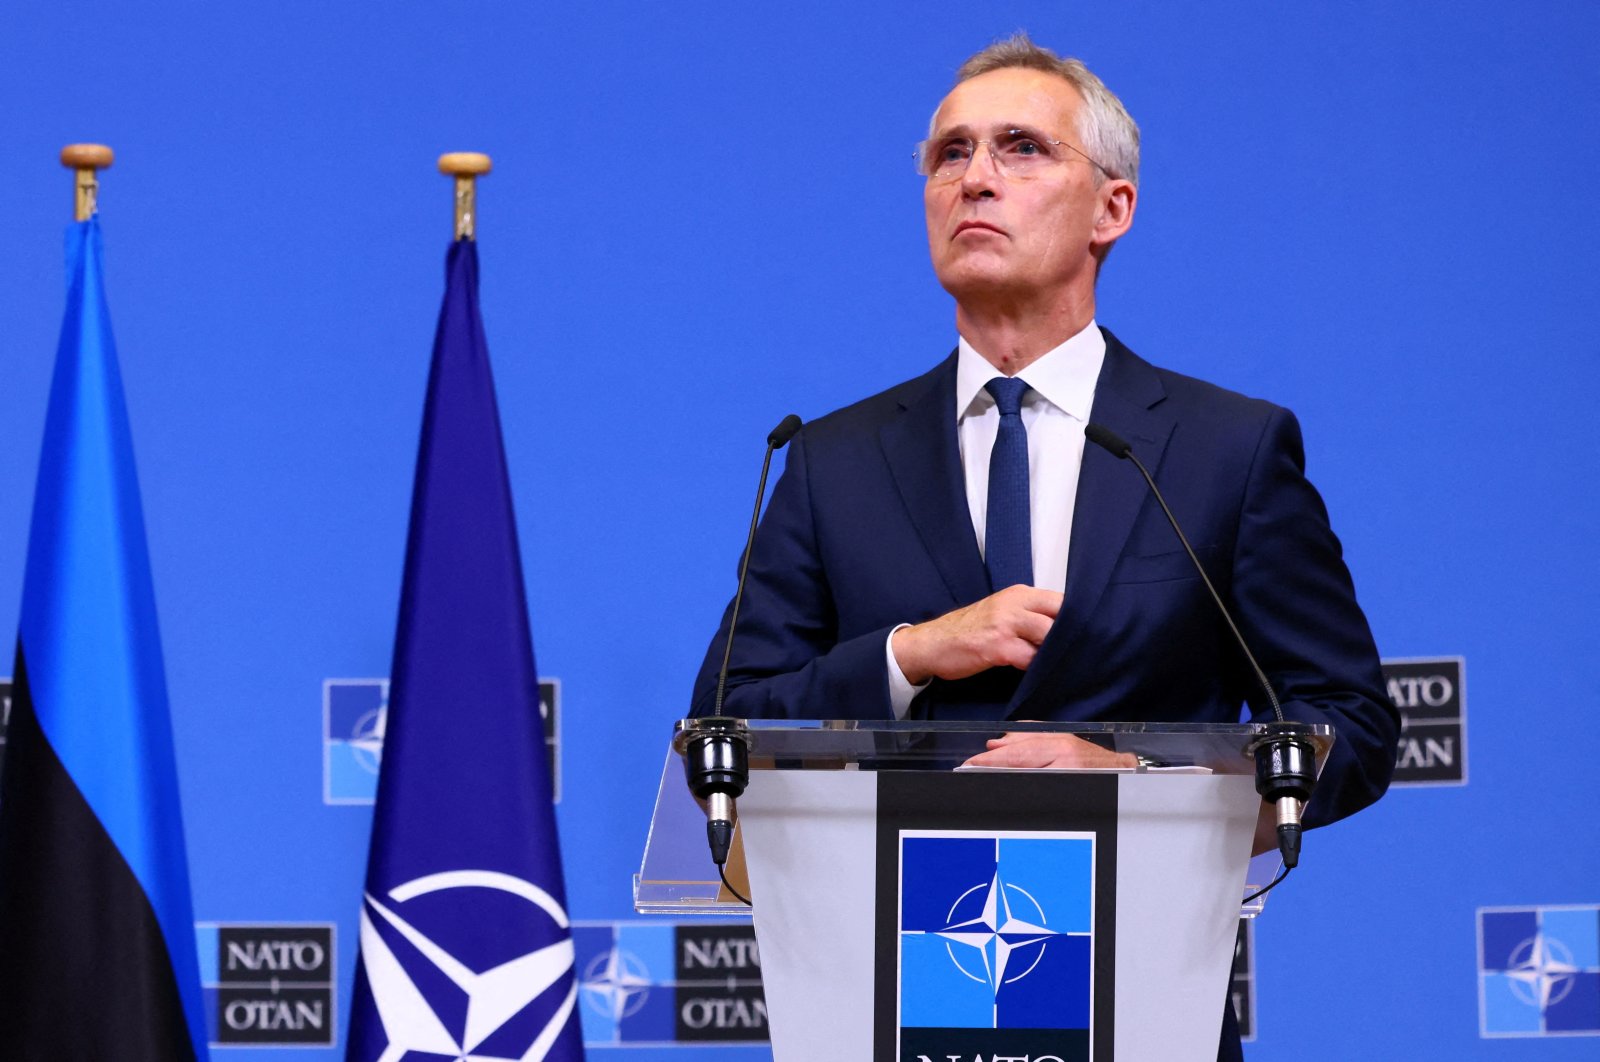 NATO Secretary-General Jens Stoltenberg and Estonian Prime Minister Kaja Kallas (not pictured) hold a news conference at the NATO Headquarters in Brussels, Belgium June 28, 2023. (Reuters File Photo)